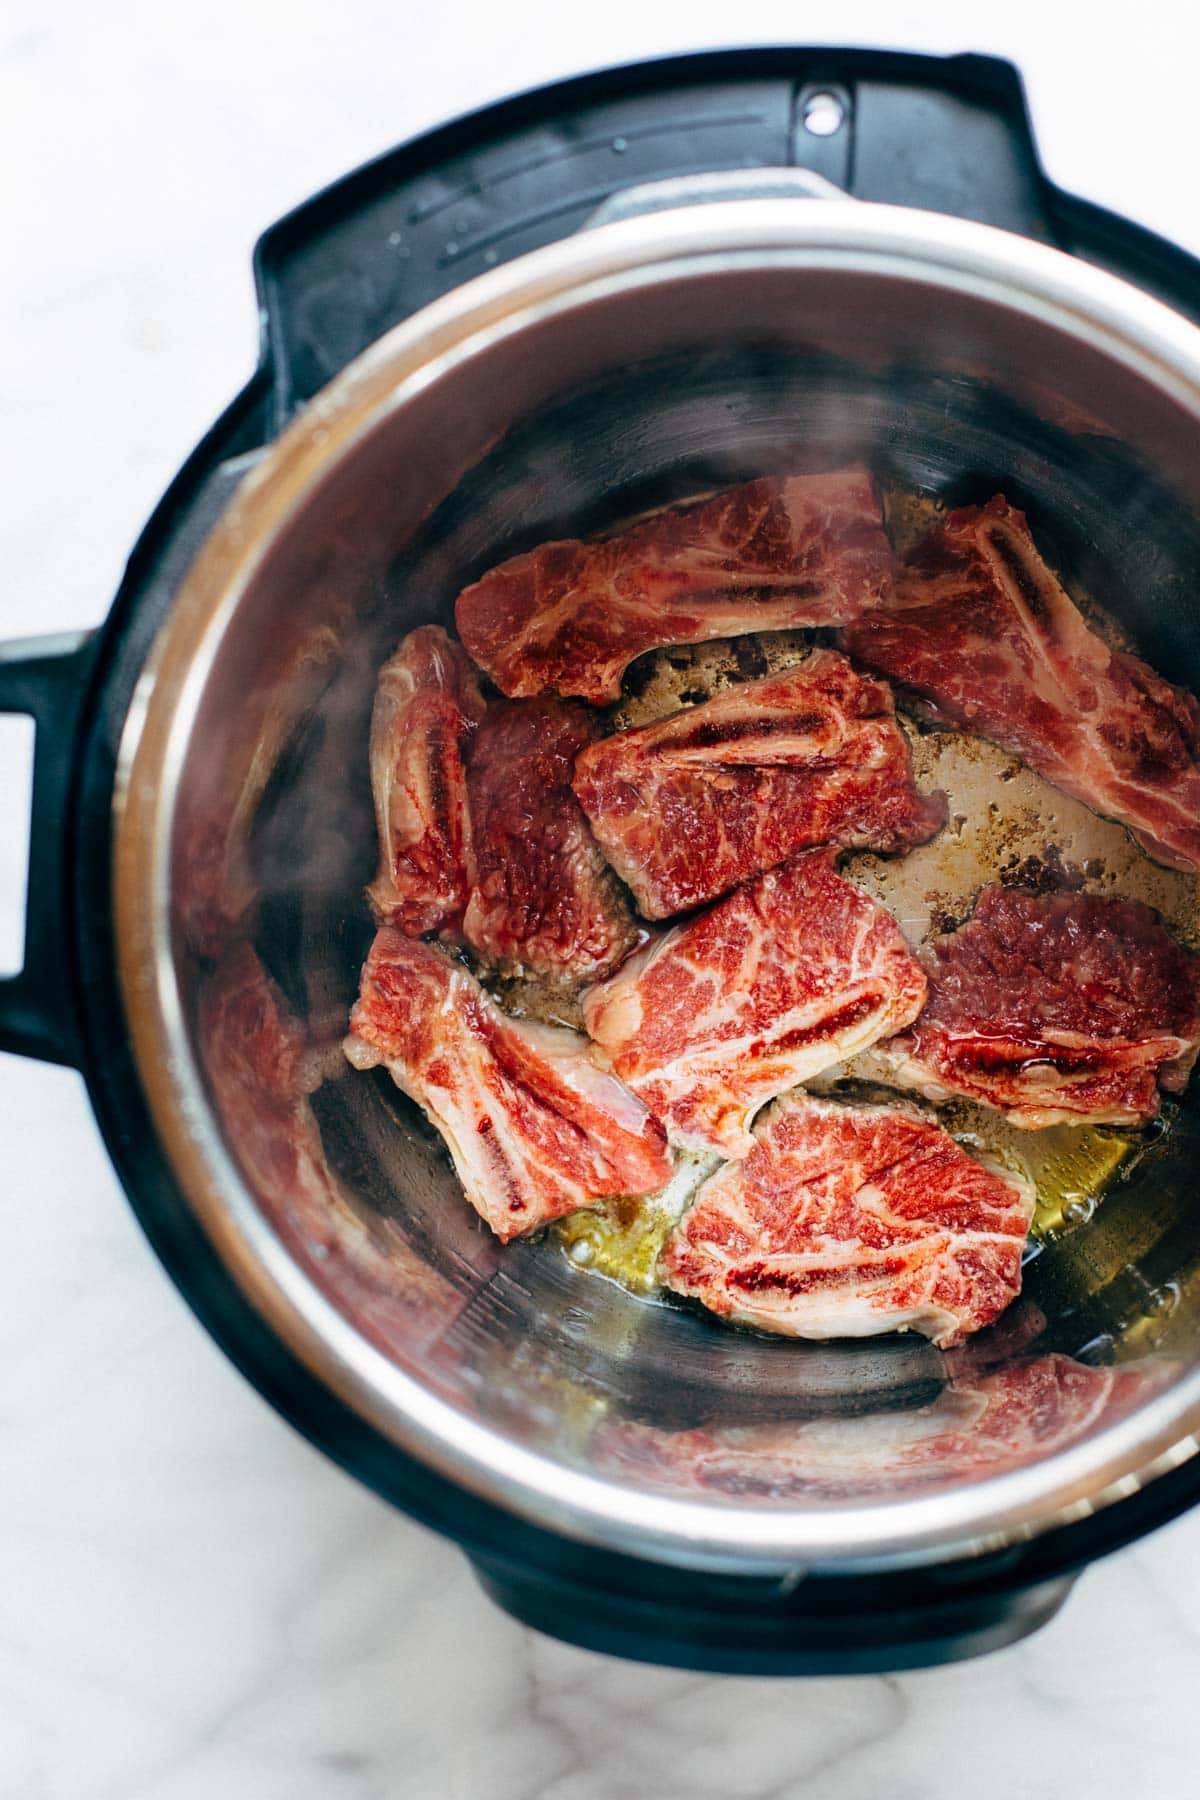 Short ribs in an Instant Pot.